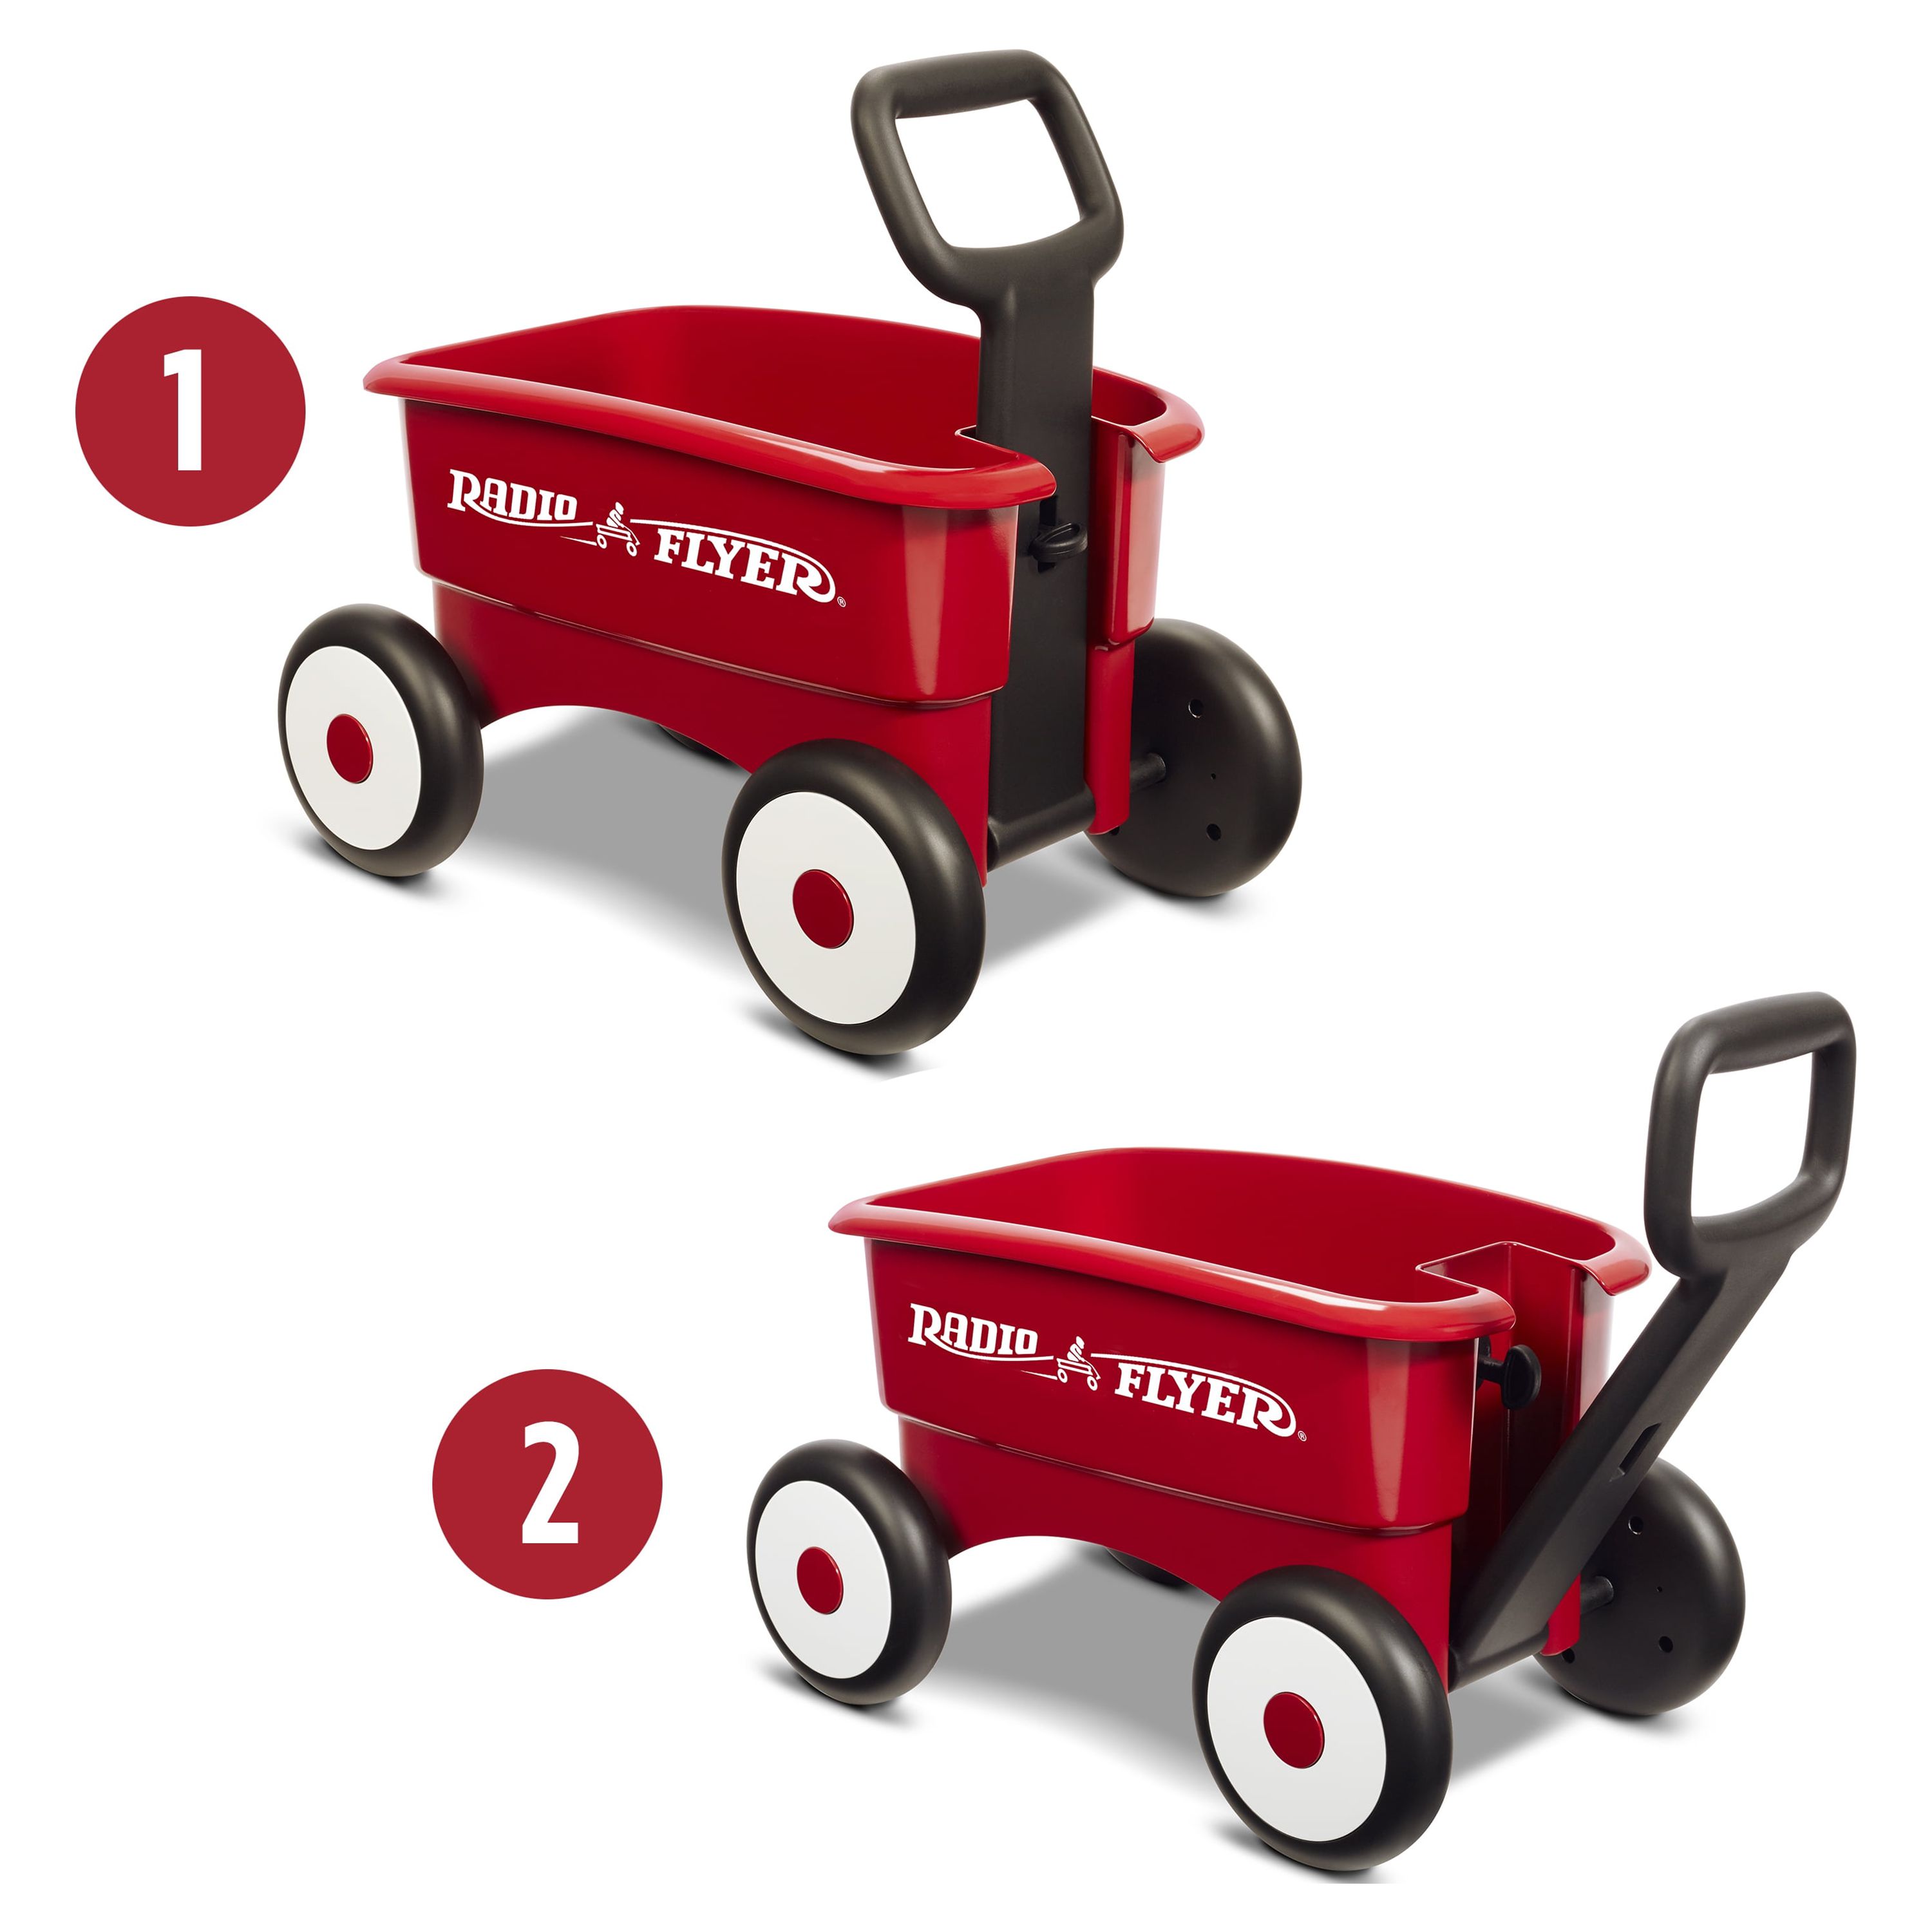 Radio Flyer, My 1st 2-in-1 Play Wagon Push Walker, Red - image 3 of 9